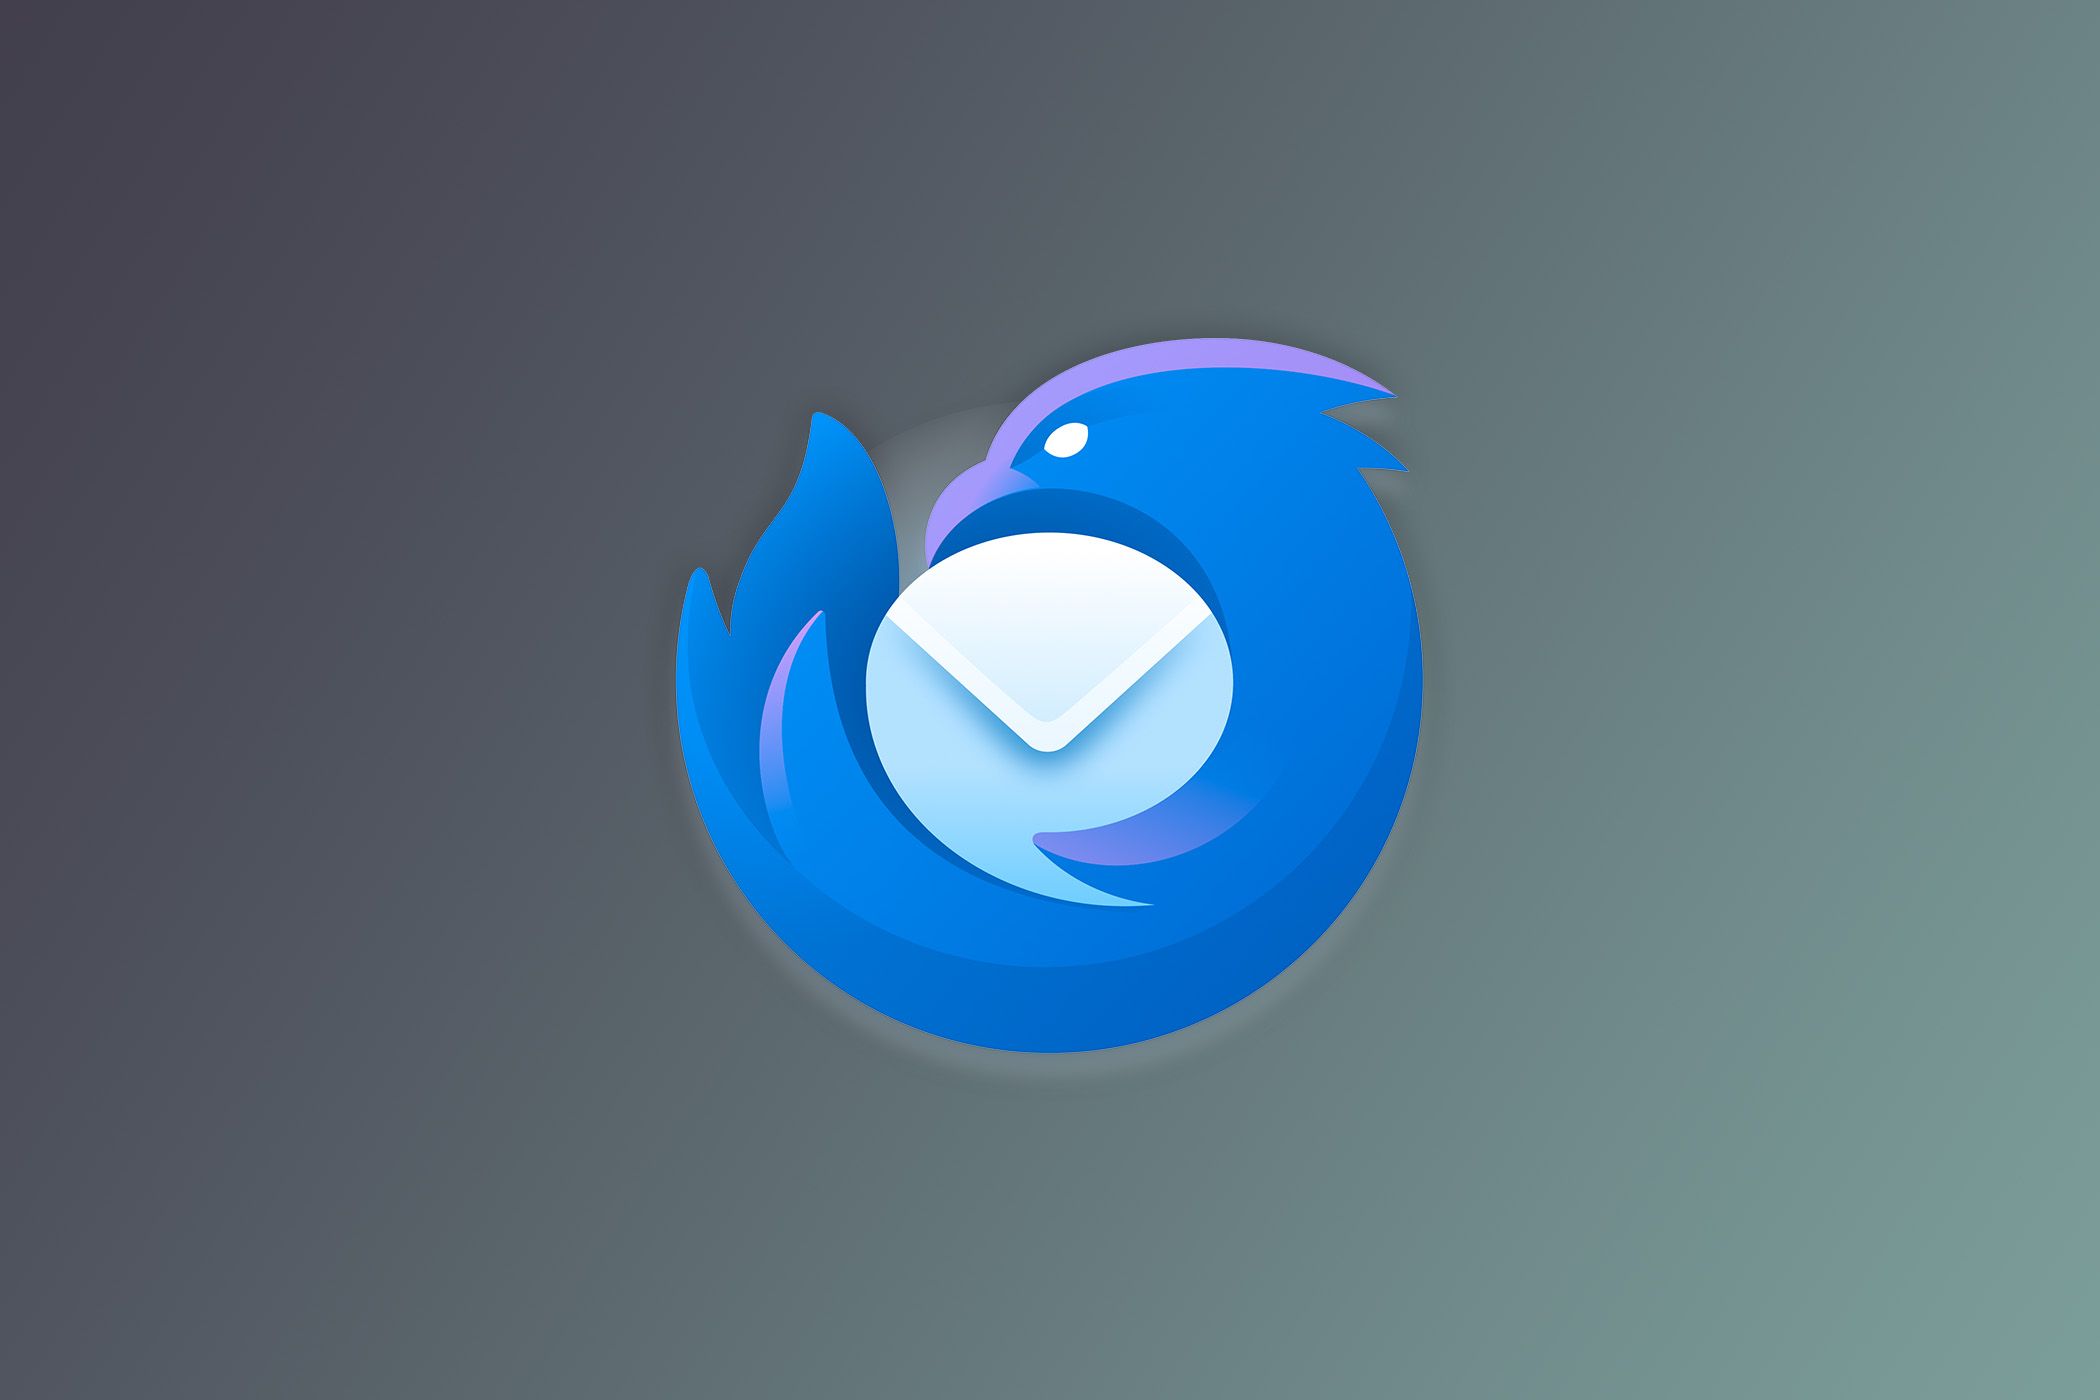 #Thunderbird Mail’s Sync Feature Has Been Delayed